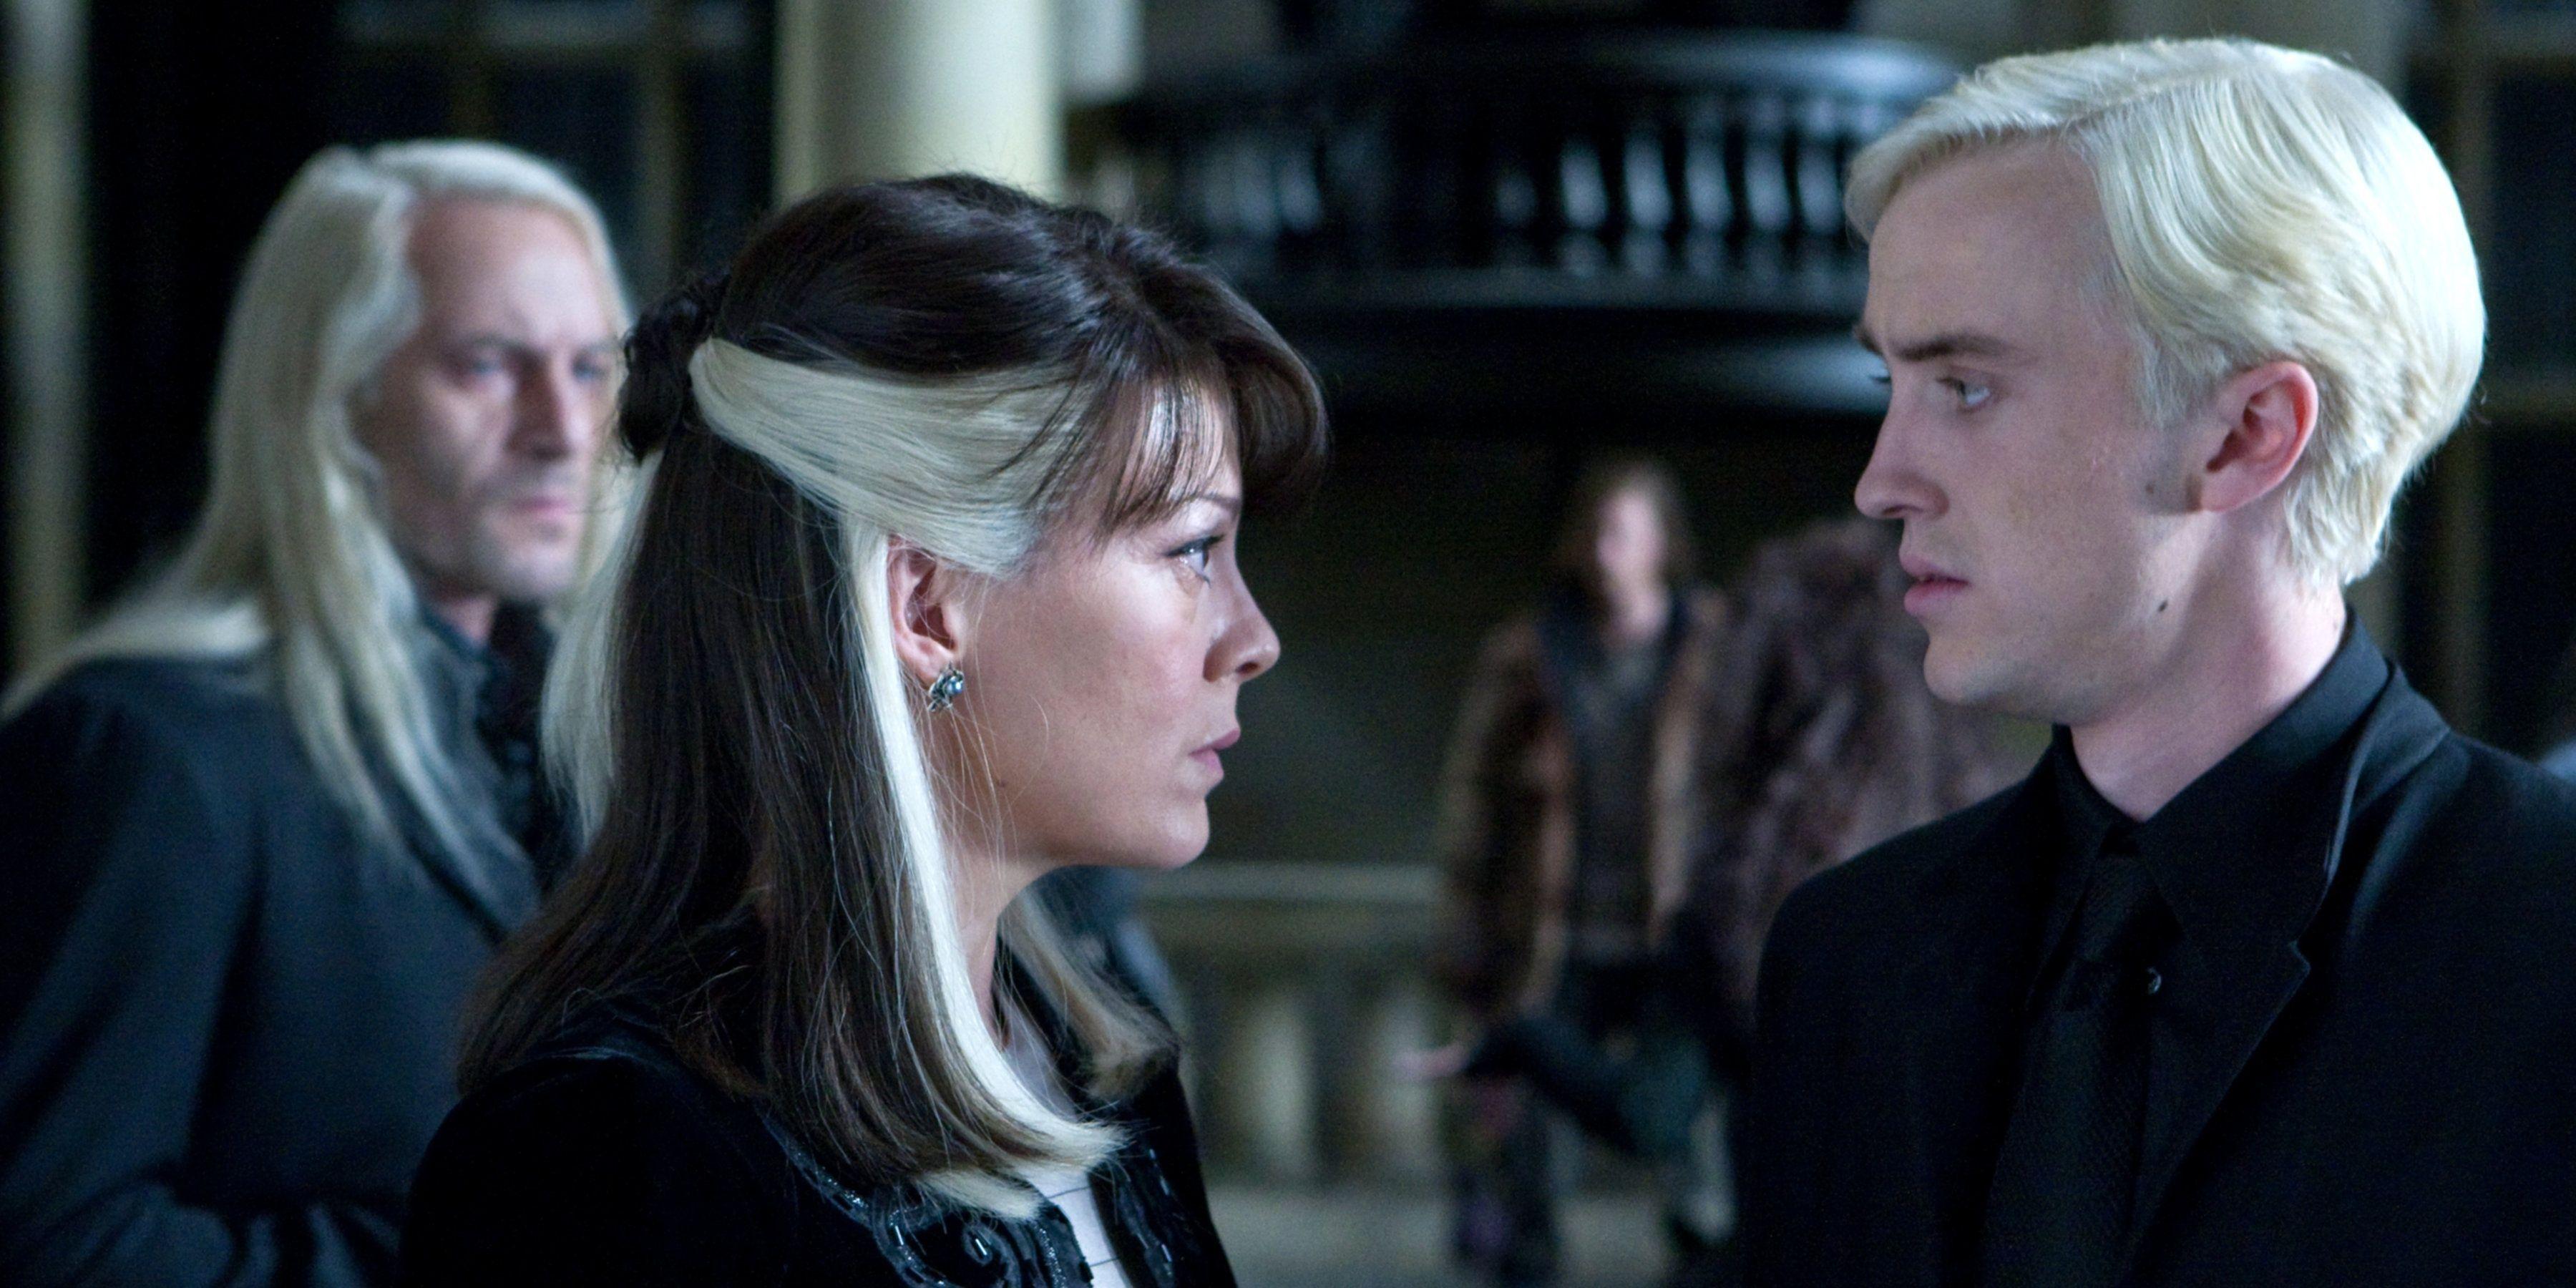 Narcissa Malfoy (Helen McCrory) and Draco Malfoy (Tom Felton) look at one another in 'Harry Potter and the Deathly Hallows: Part 1'.